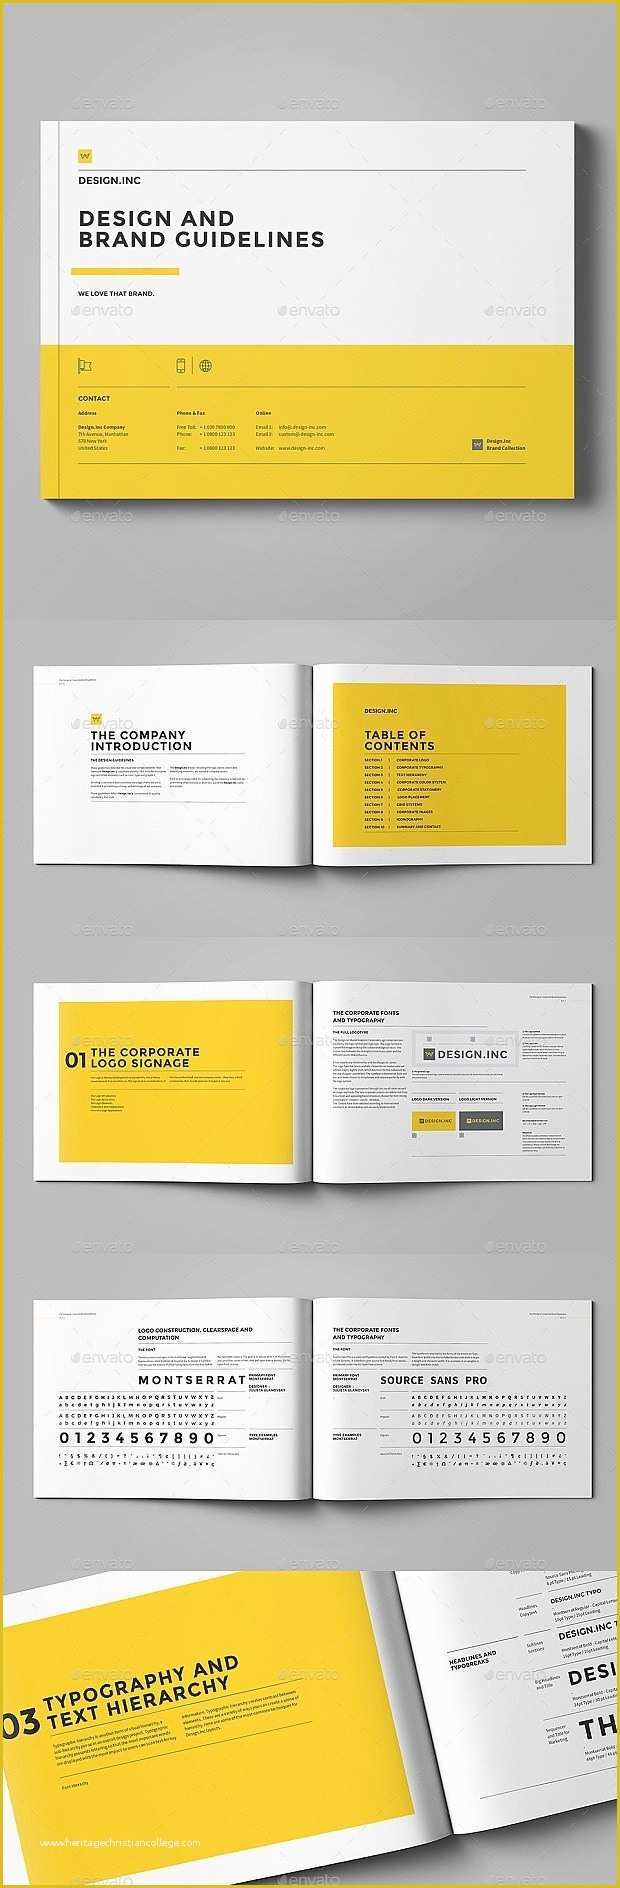 Brand Guidelines Template Indesign Free Of 25 Indesign Brand Guidelines Templates